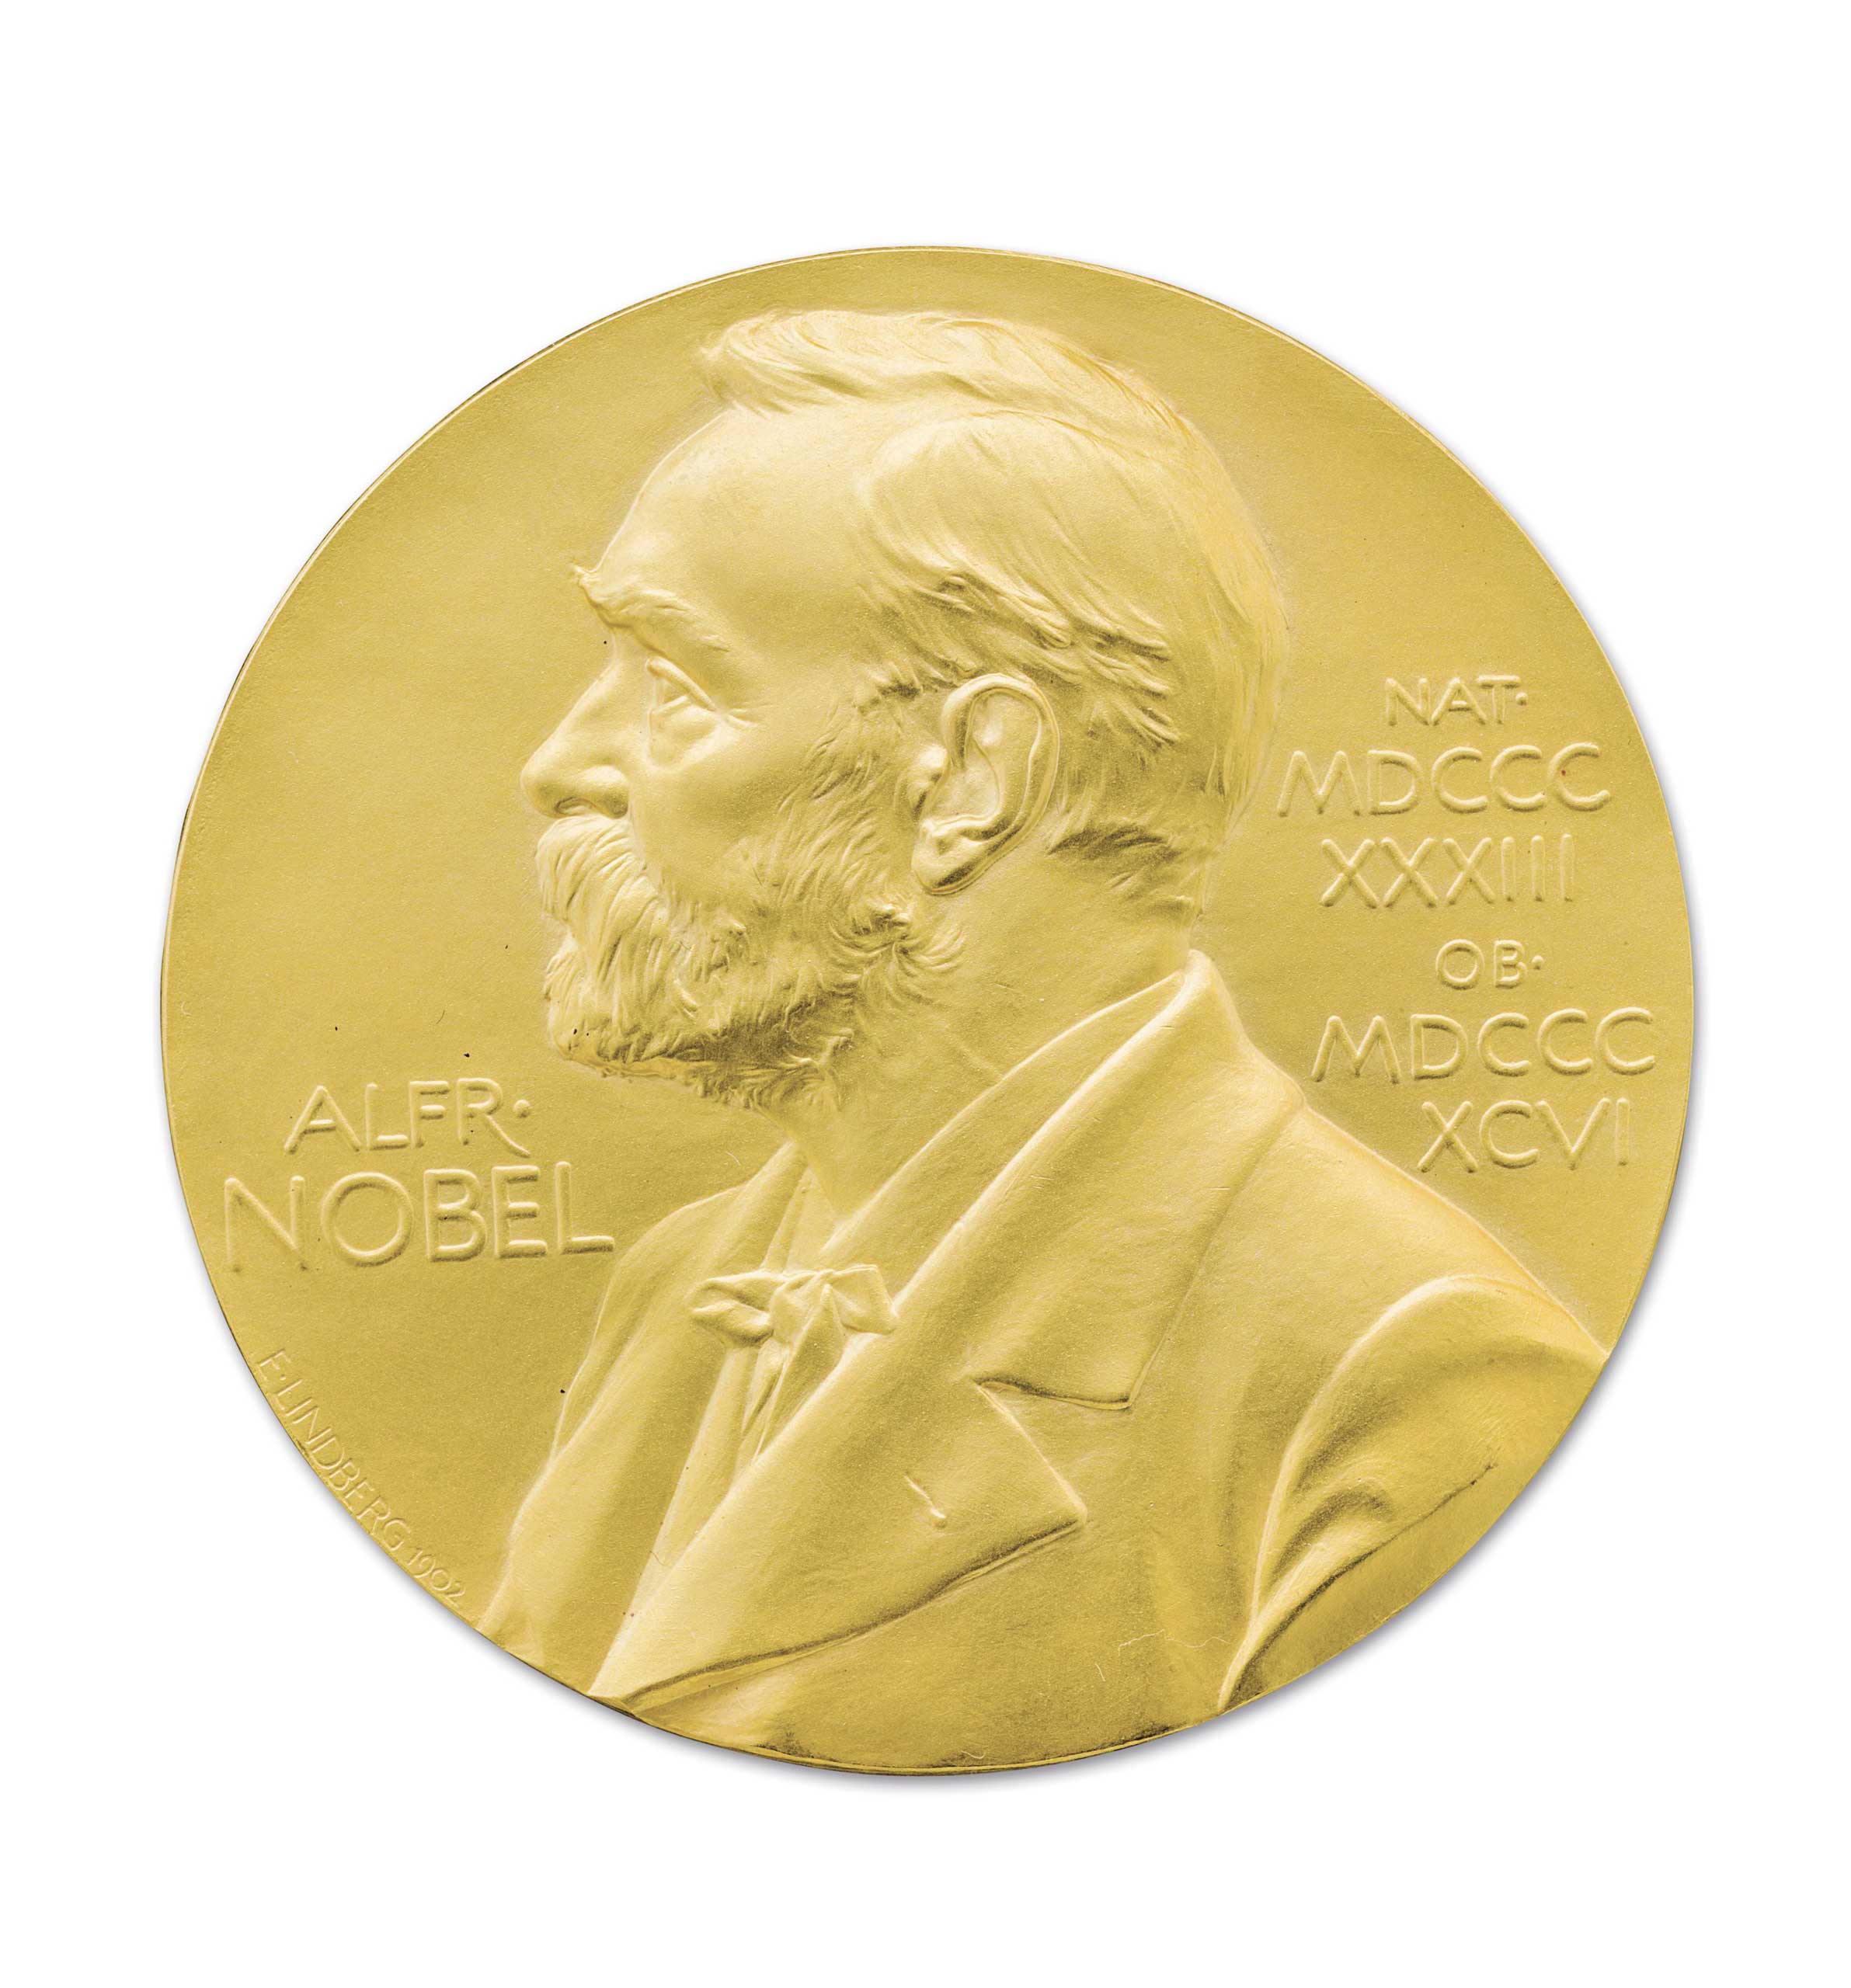 Auction of Nobel Prize medal of James Watson